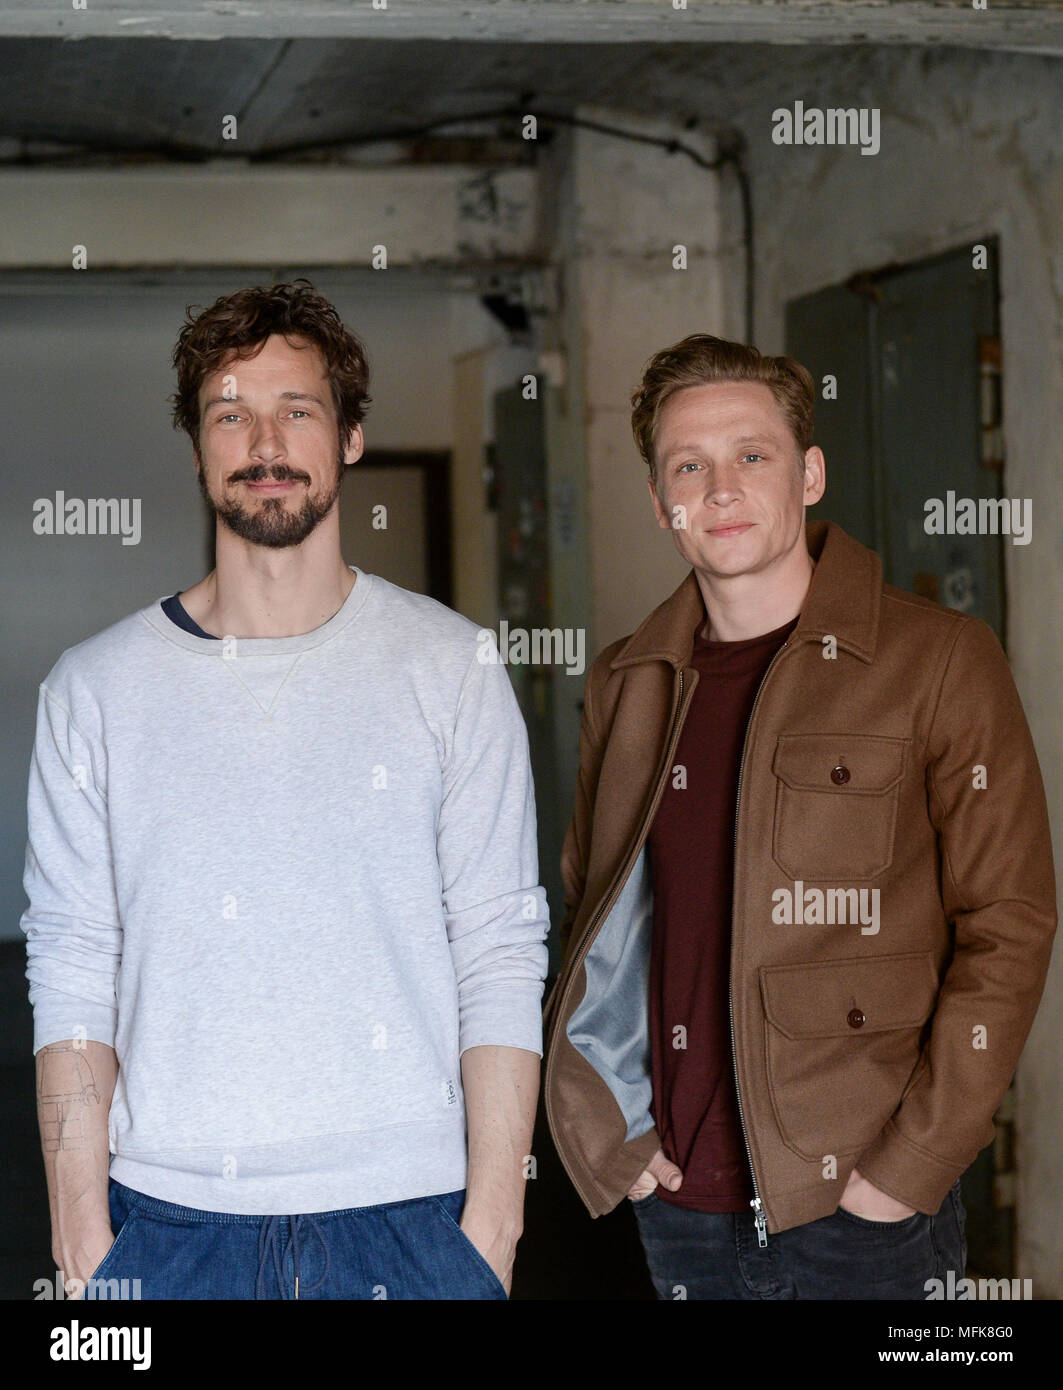 https://c8.alamy.com/comp/MFK8G0/25april-2018-germany-berlin-actor-matthias-schweighoefer-r-and-director-and-actor-florian-david-fitz-pictured-on-the-set-of-their-new-film-100-dinge-in-the-kreuzberg-area-of-berlin-photo-jens-kalaenedpa-zentralbilddpa-MFK8G0.jpg